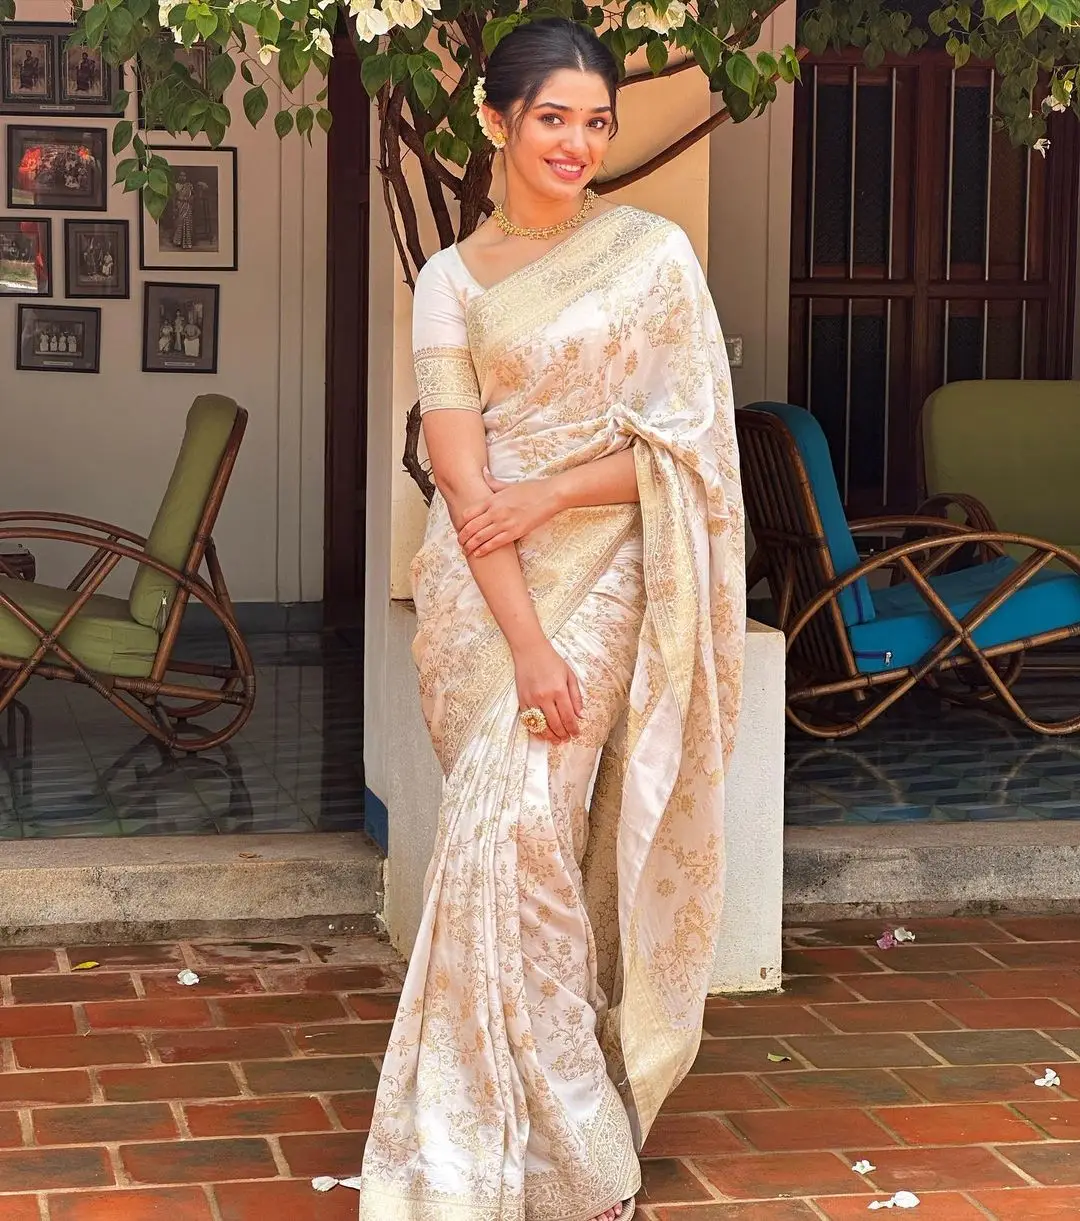 KRITHI SHETTY IN SOUTH INDIAN TRADITIONAL WHITE SAREE 2